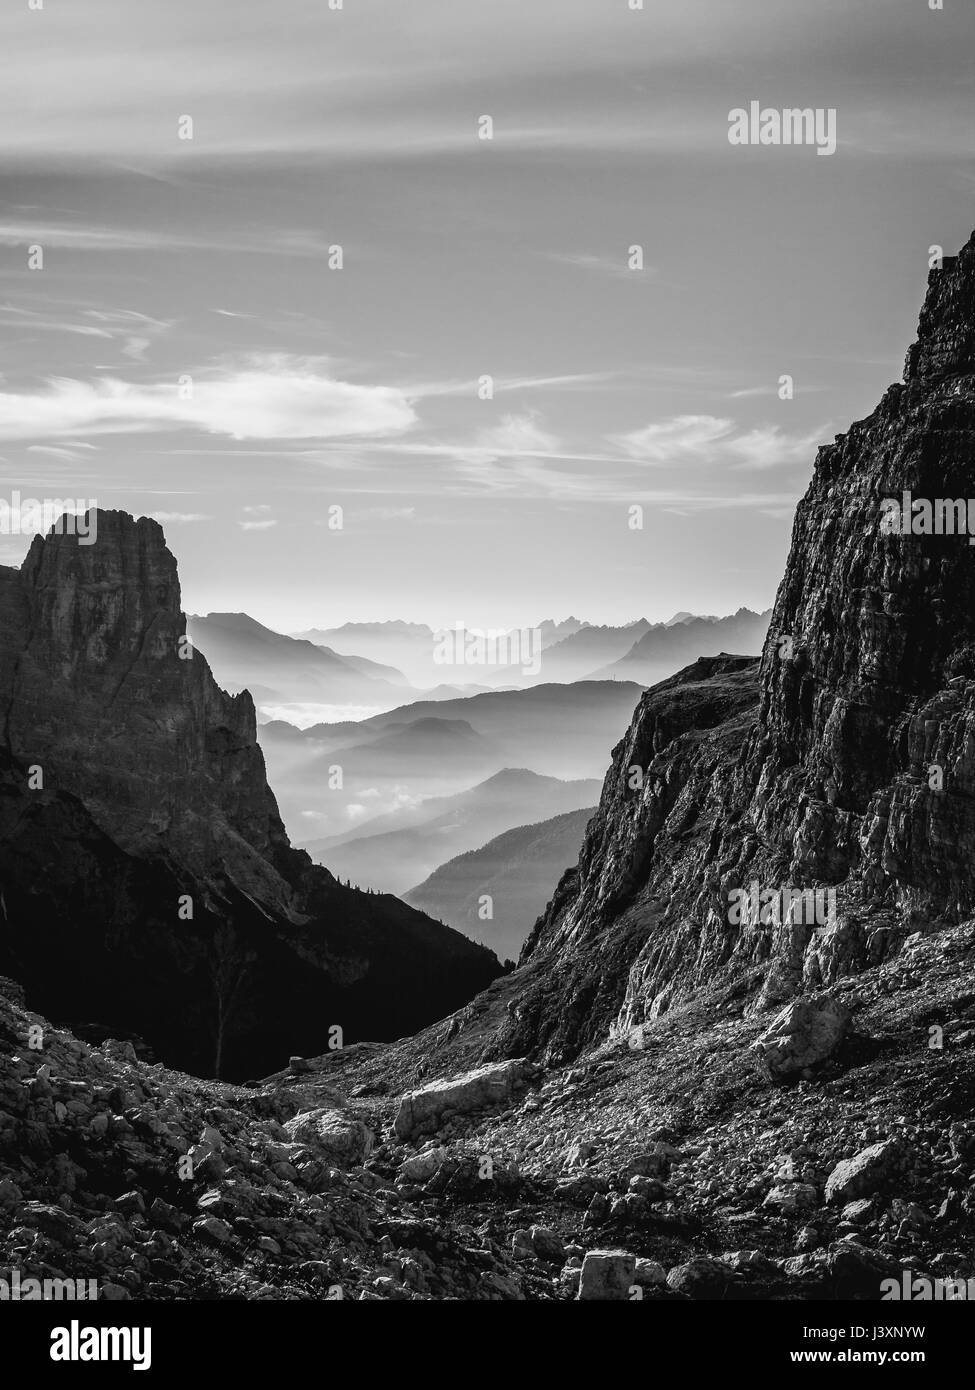 Black and white landscape view of hazy rolling mountains and hills in the Italian Dolomites at sunrise. Portrait orientation. Stock Photo